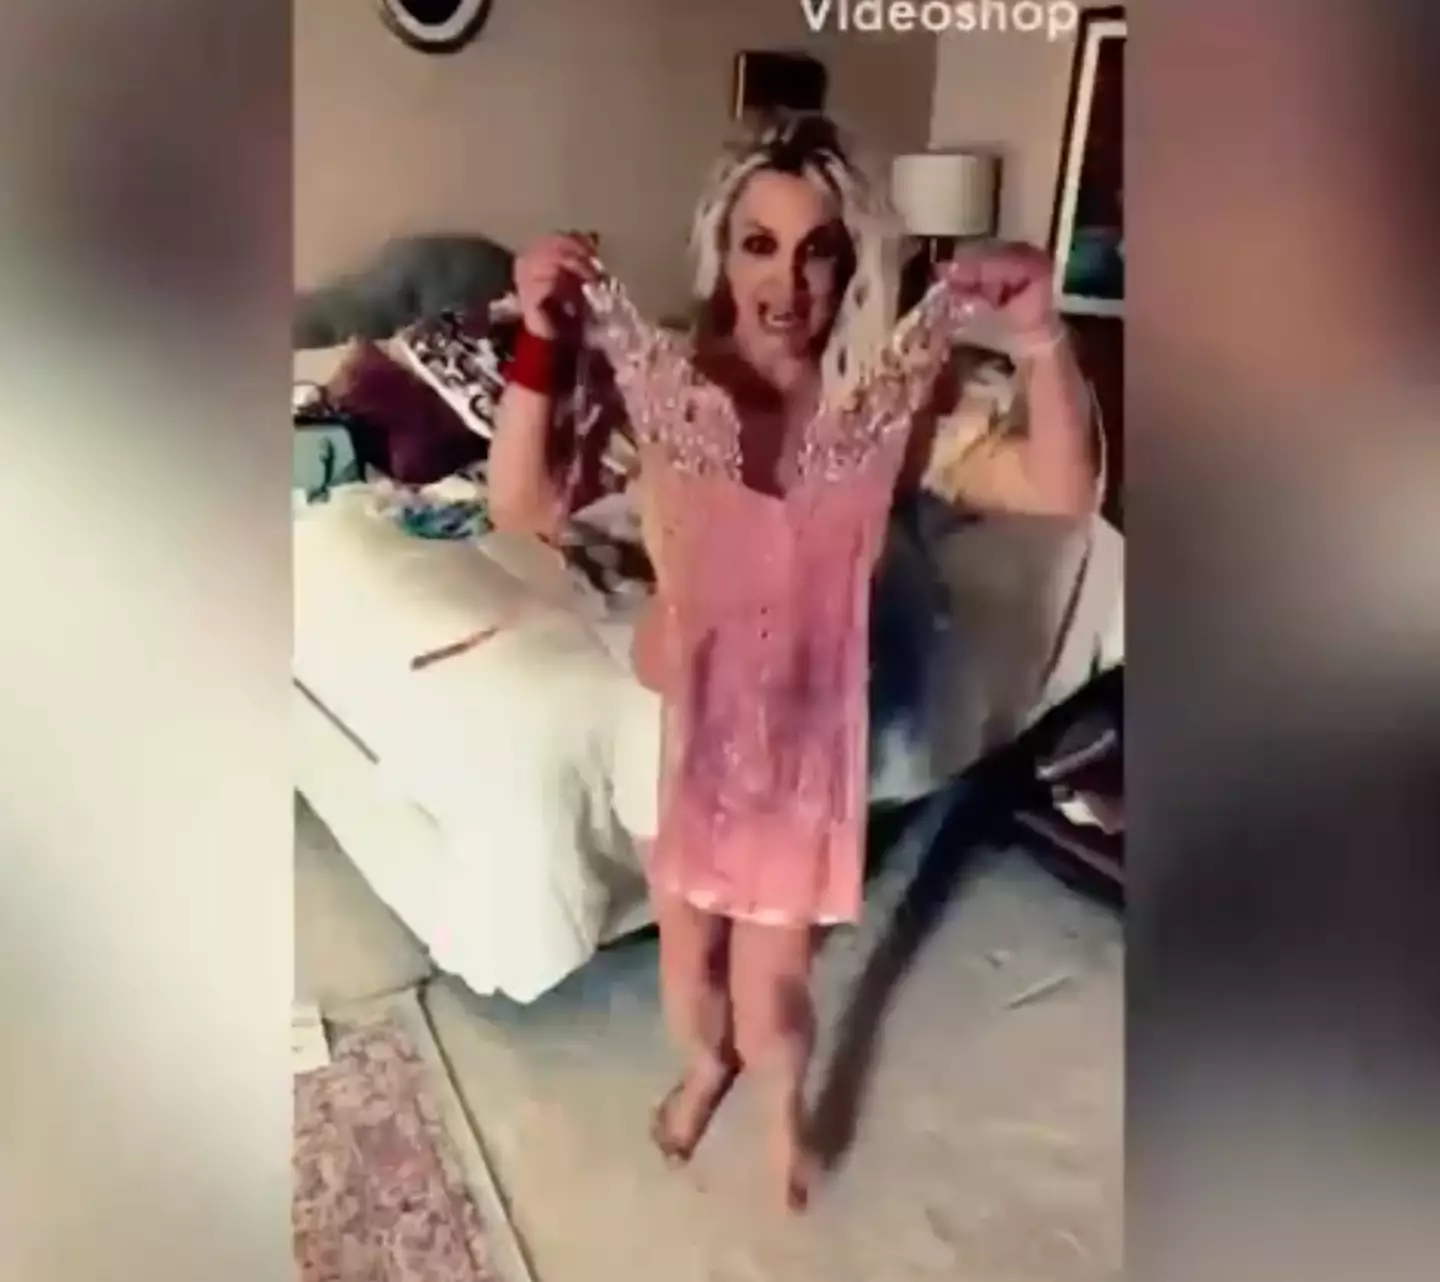 Britney Spears shared the unusual video on her Instagram.